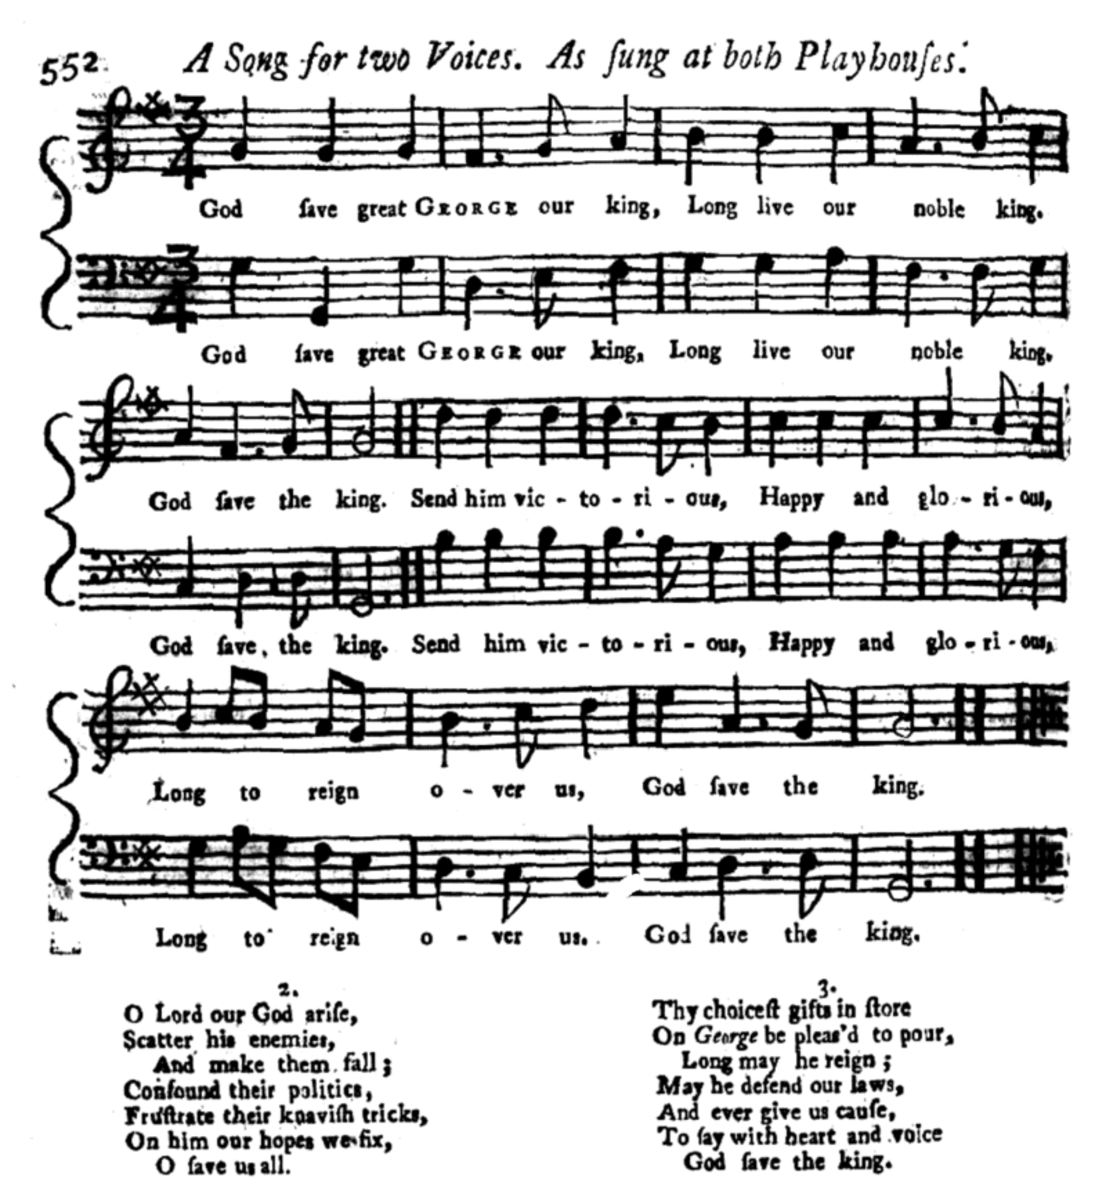 A music sheet from 1745, the year God Save the King/Queen arrived in Britain.